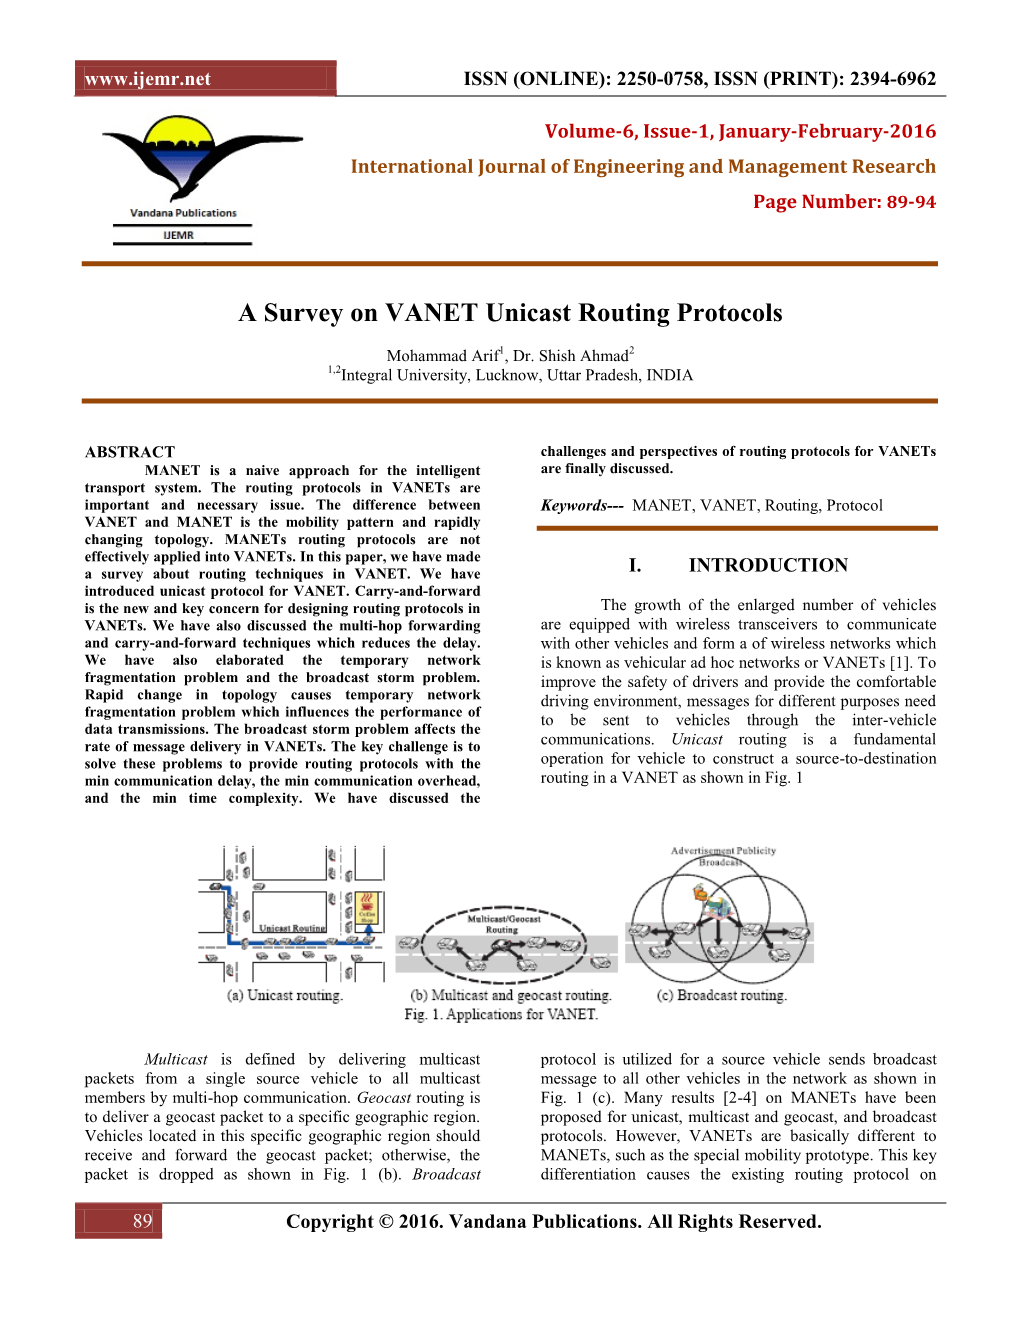 A Survey on VANET Unicast Routing Protocols